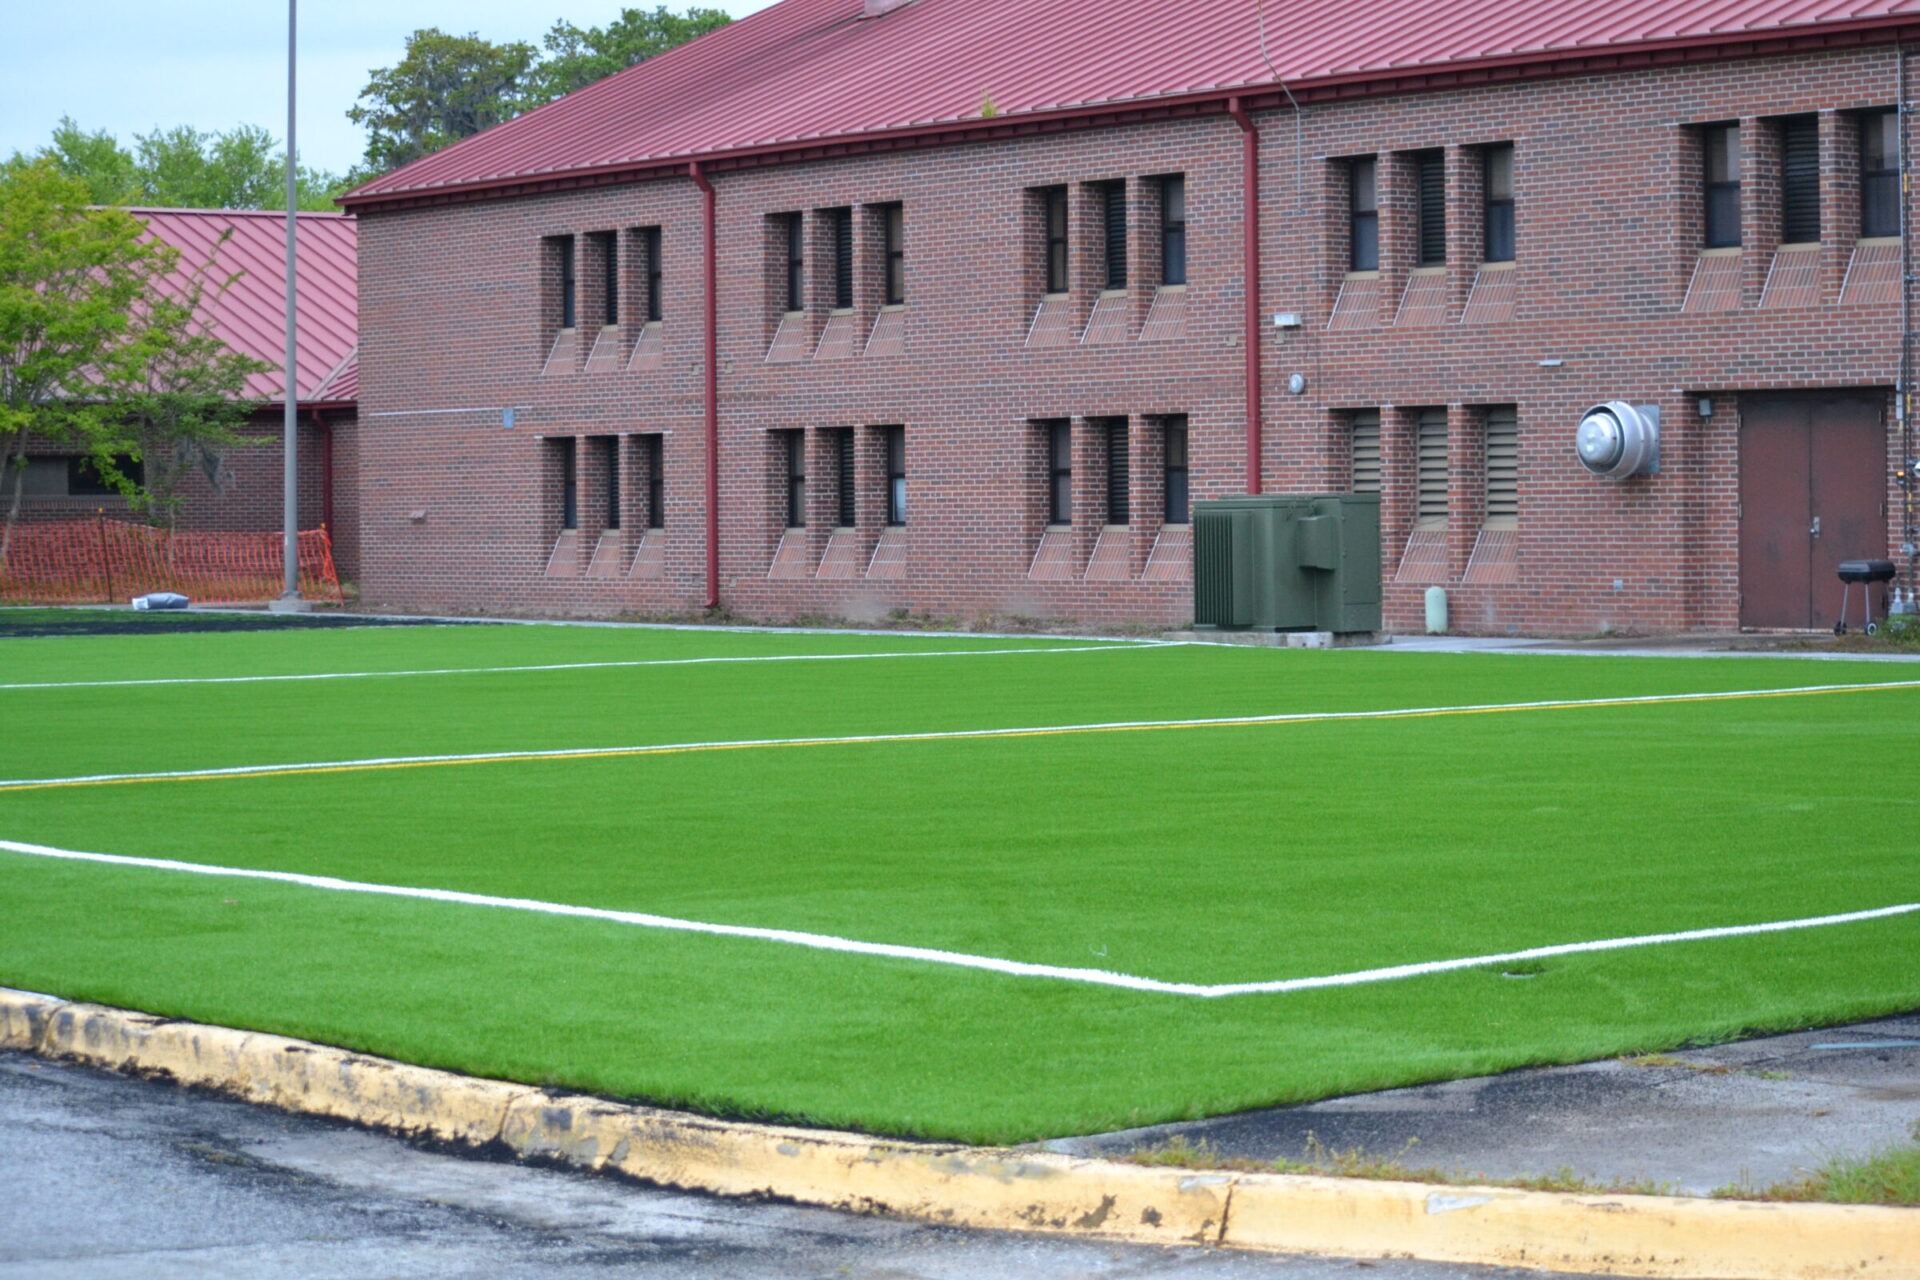 An artificial green turf field with white markings next to a red-brick building with metal barred windows and a red-tiled roof on an overcast day.